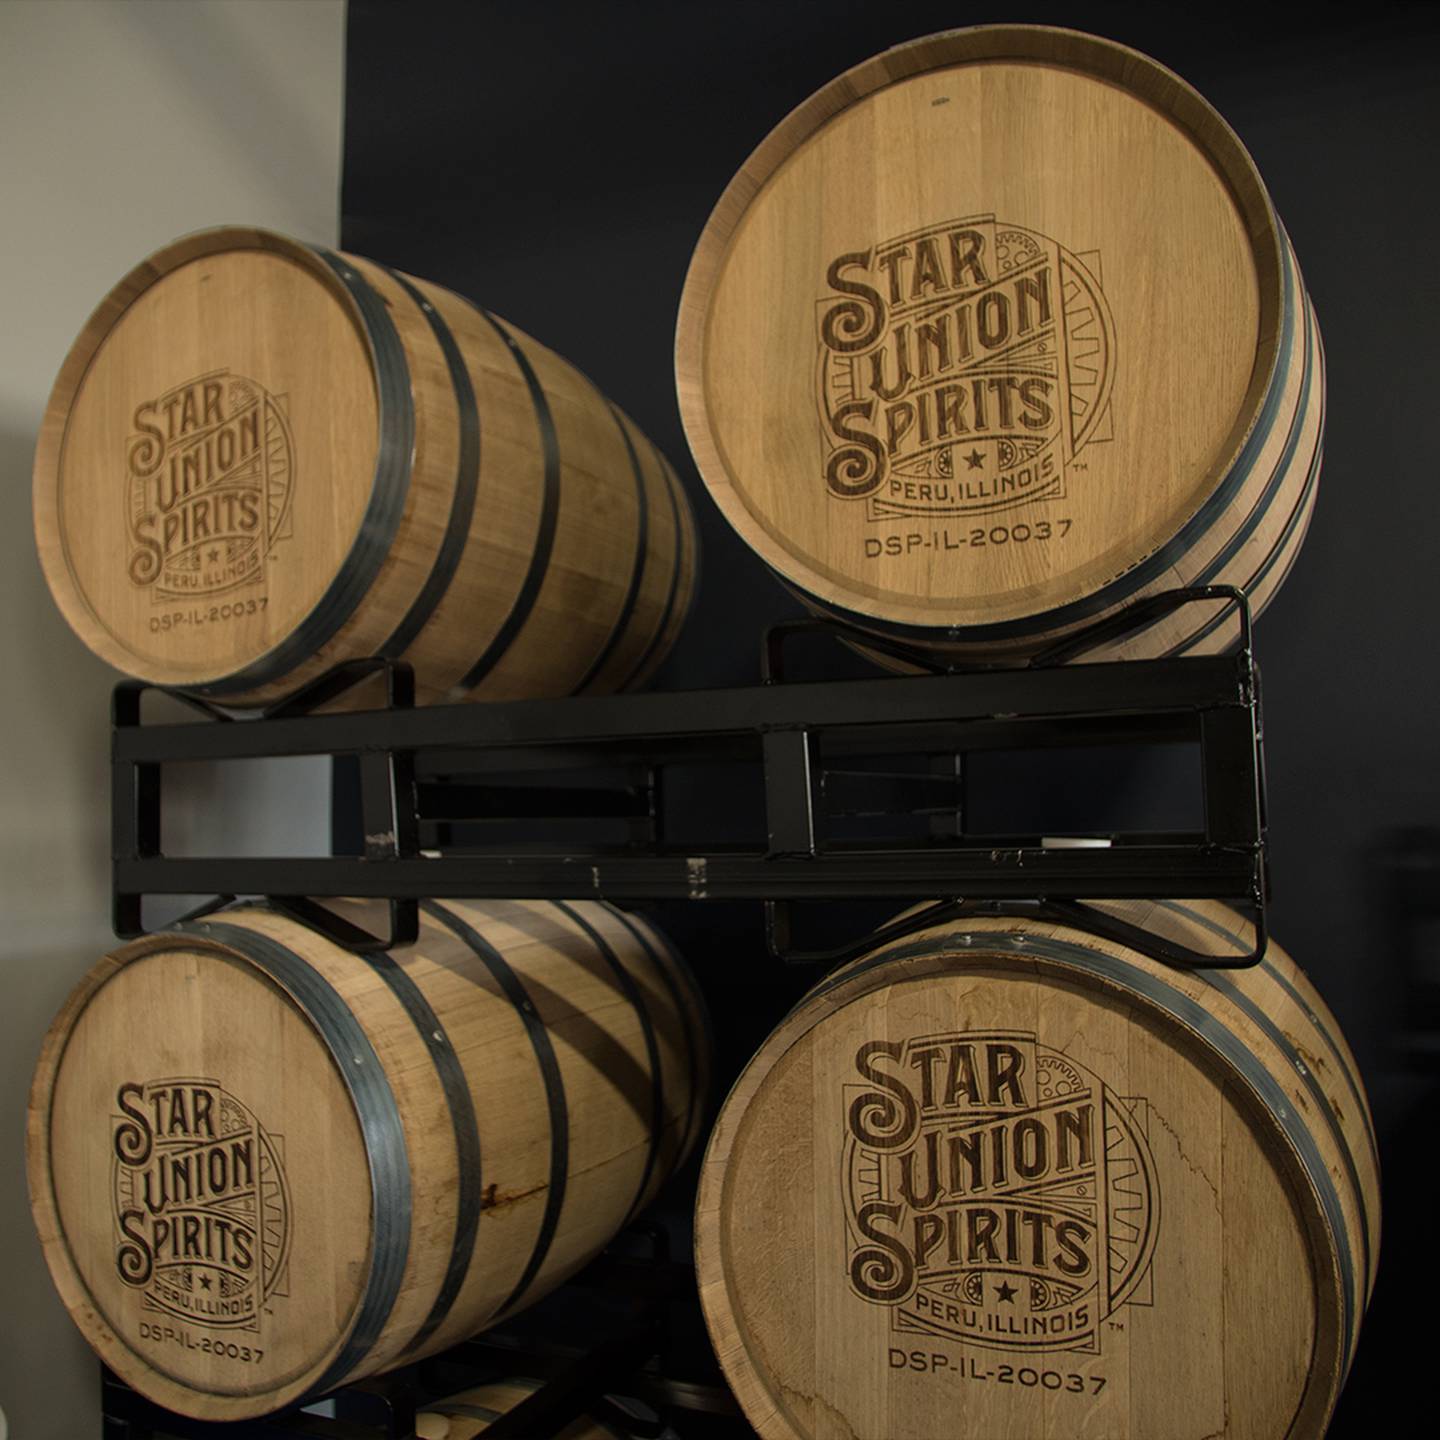 Star Union Spirits is located in Peru, Illinois.